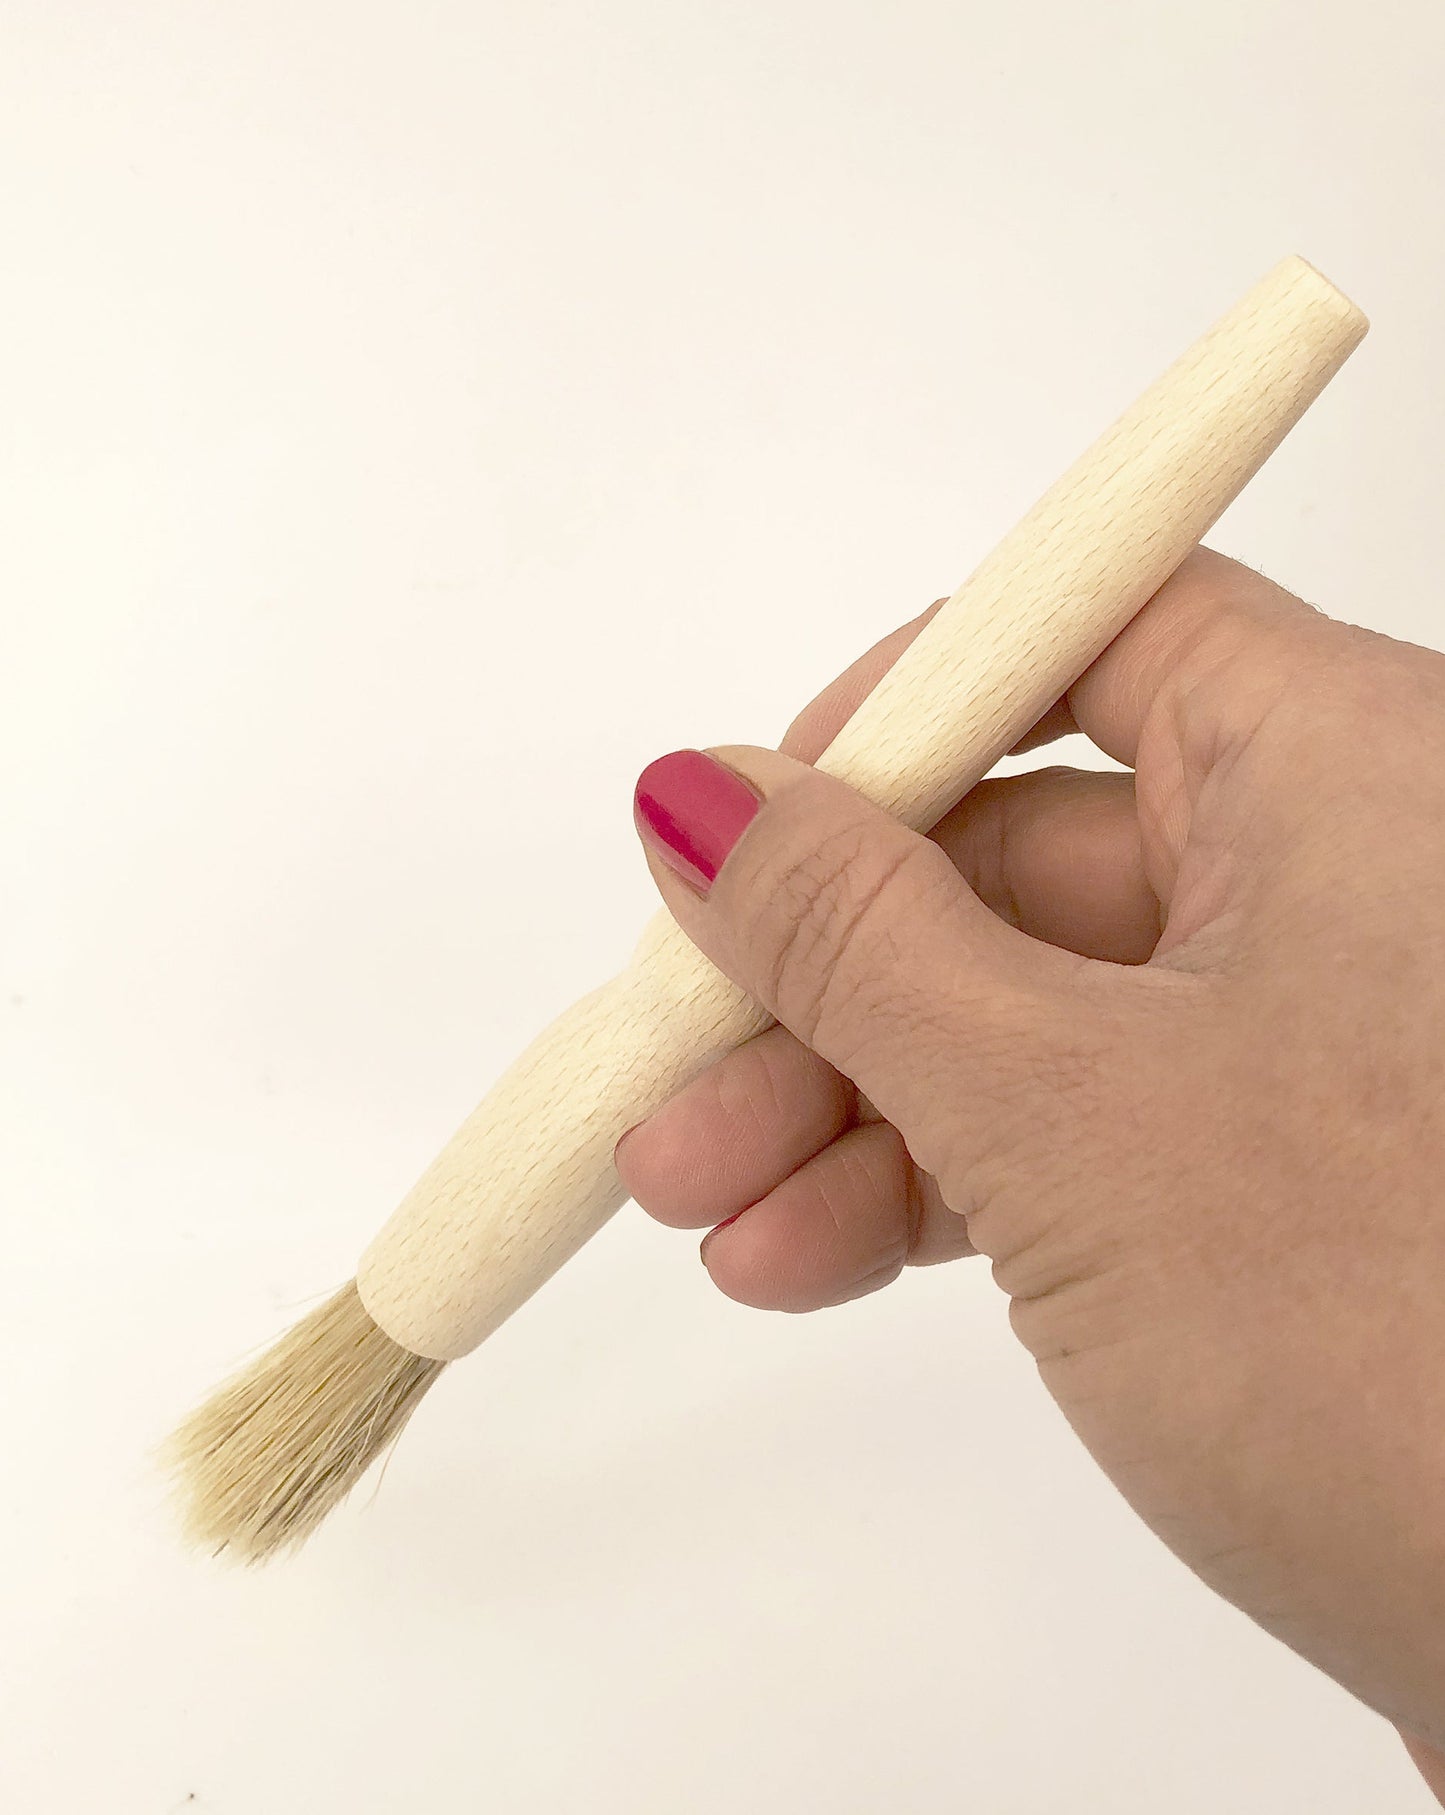 Organic shape of wood all purpose brush fits nicely in hand. Light weight, all natural and practical.